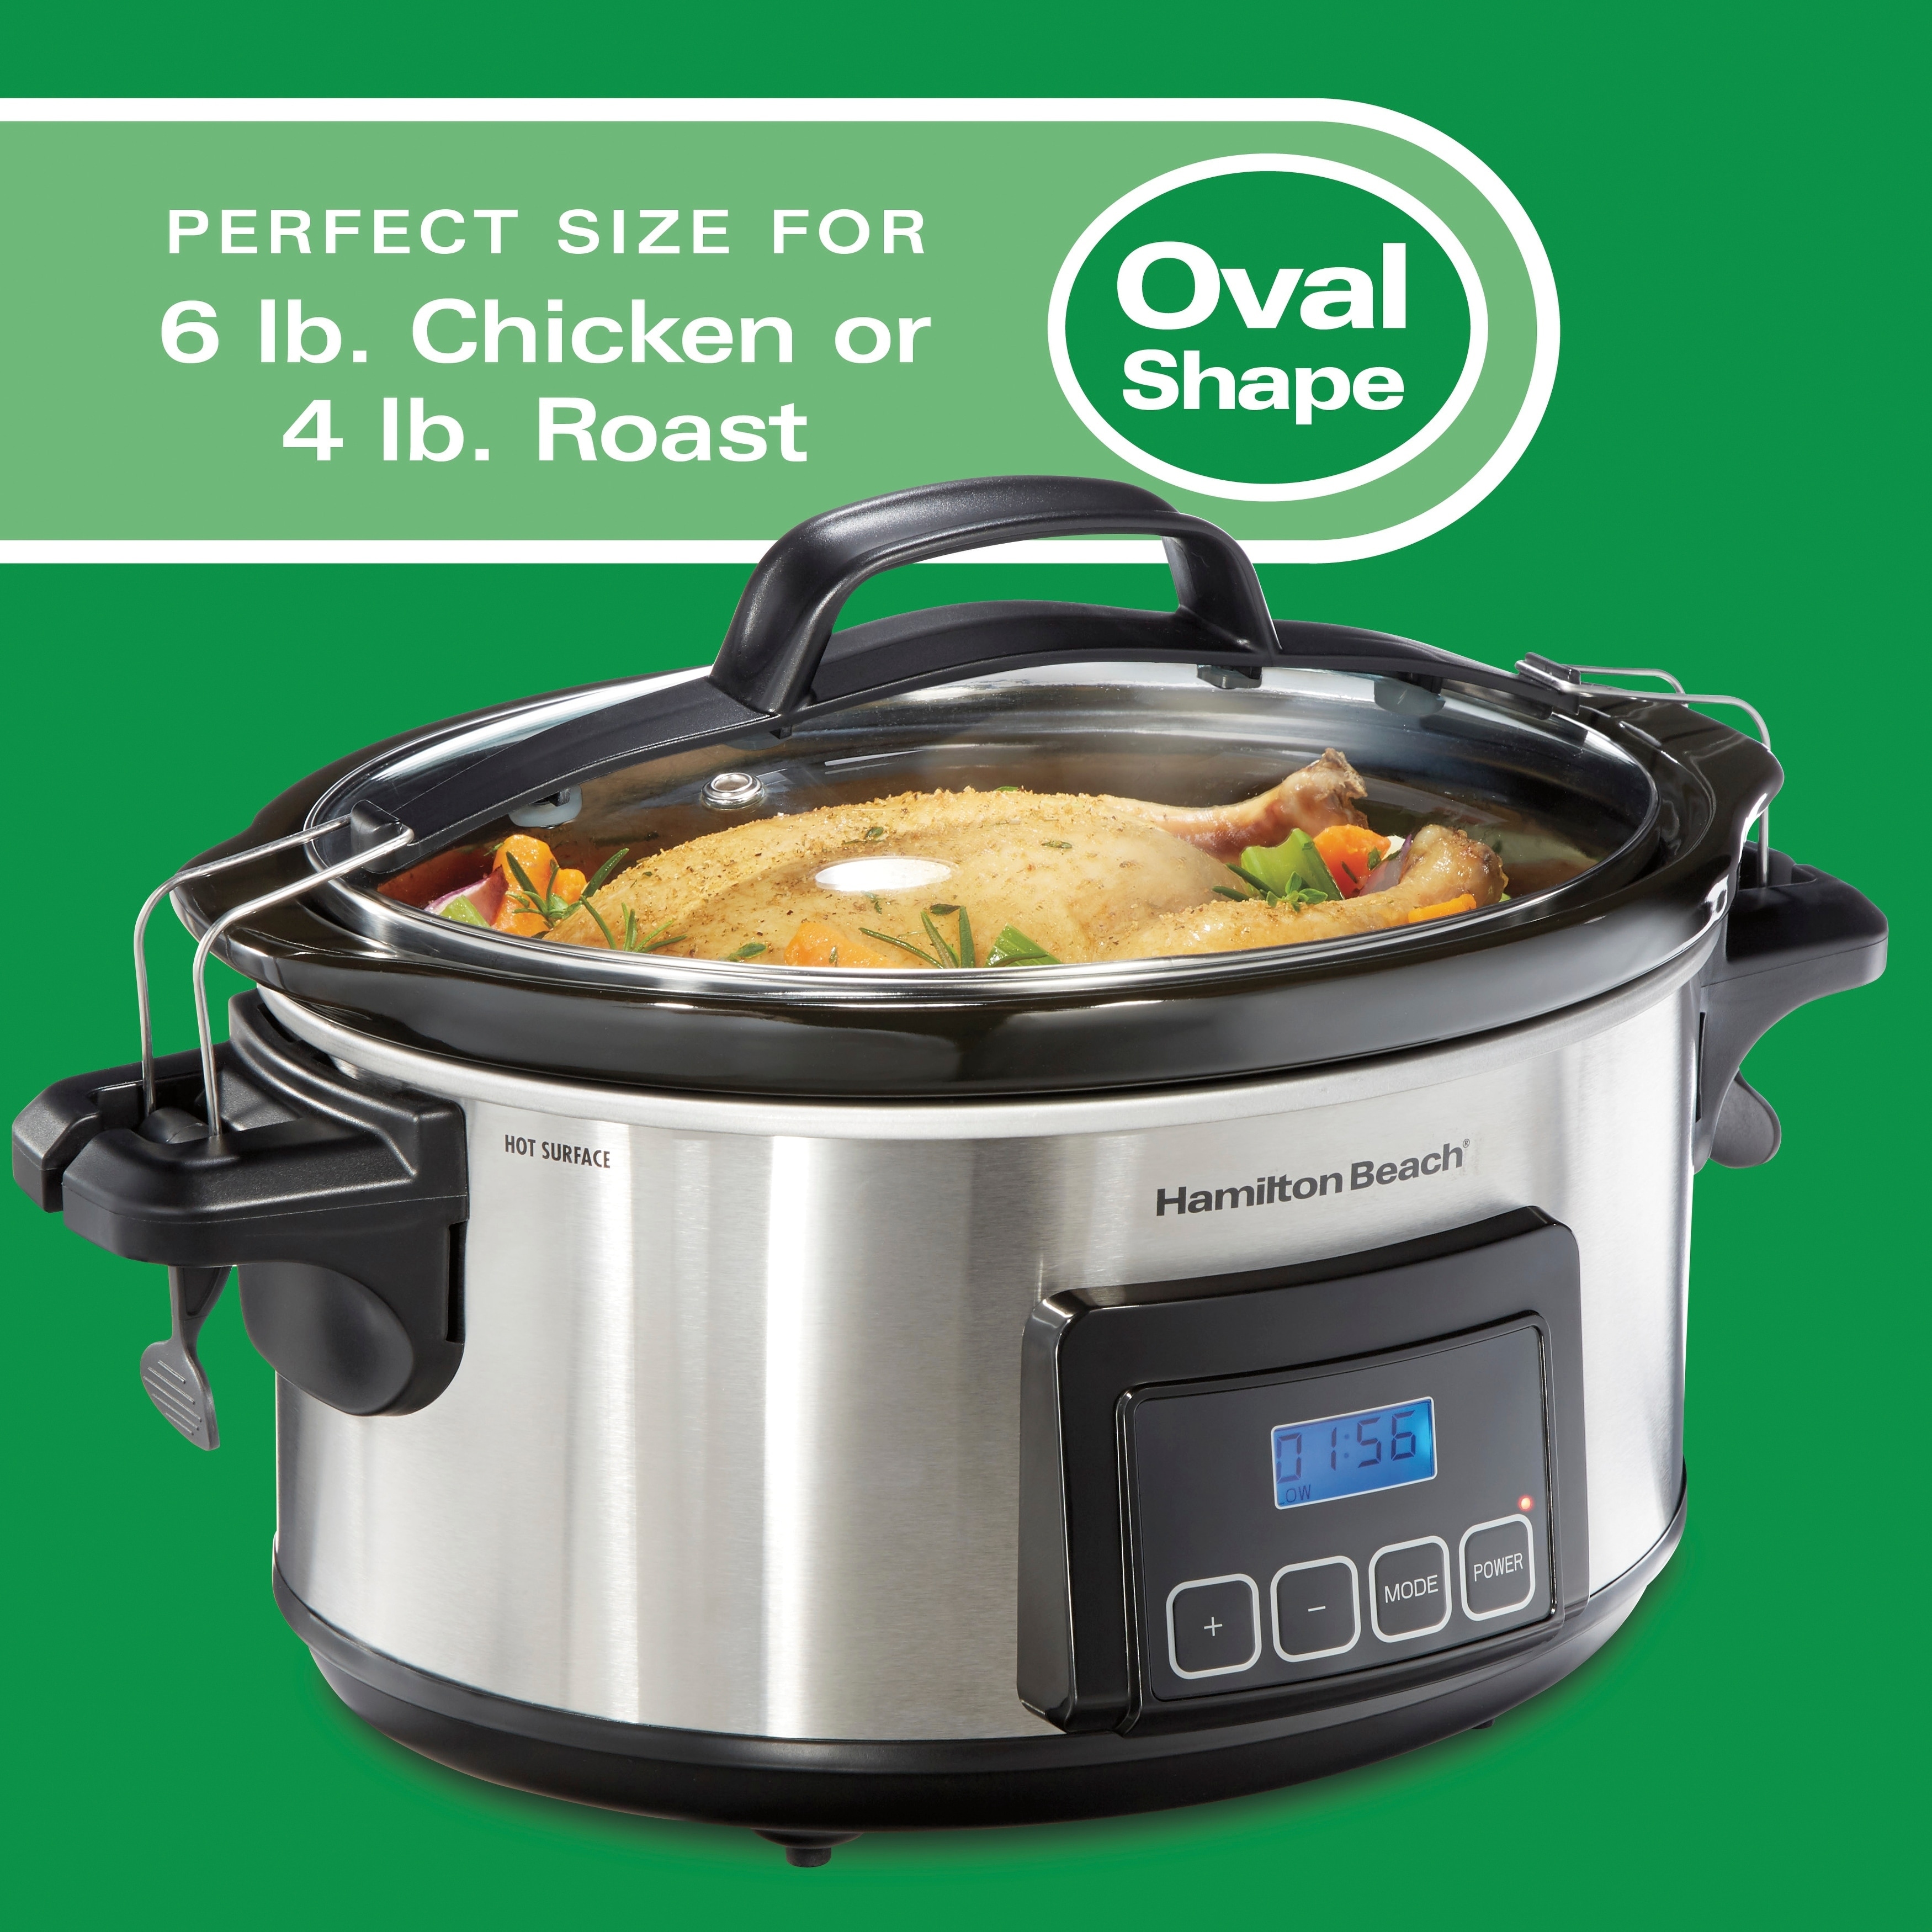 https://ak1.ostkcdn.com/images/products/28978468/Hamilton-Beach-Programmable-Stay-or-Go-6-Quart-Slow-Cooker-6406305a-3d6d-43a2-9647-a1eee4cba0f6.jpg